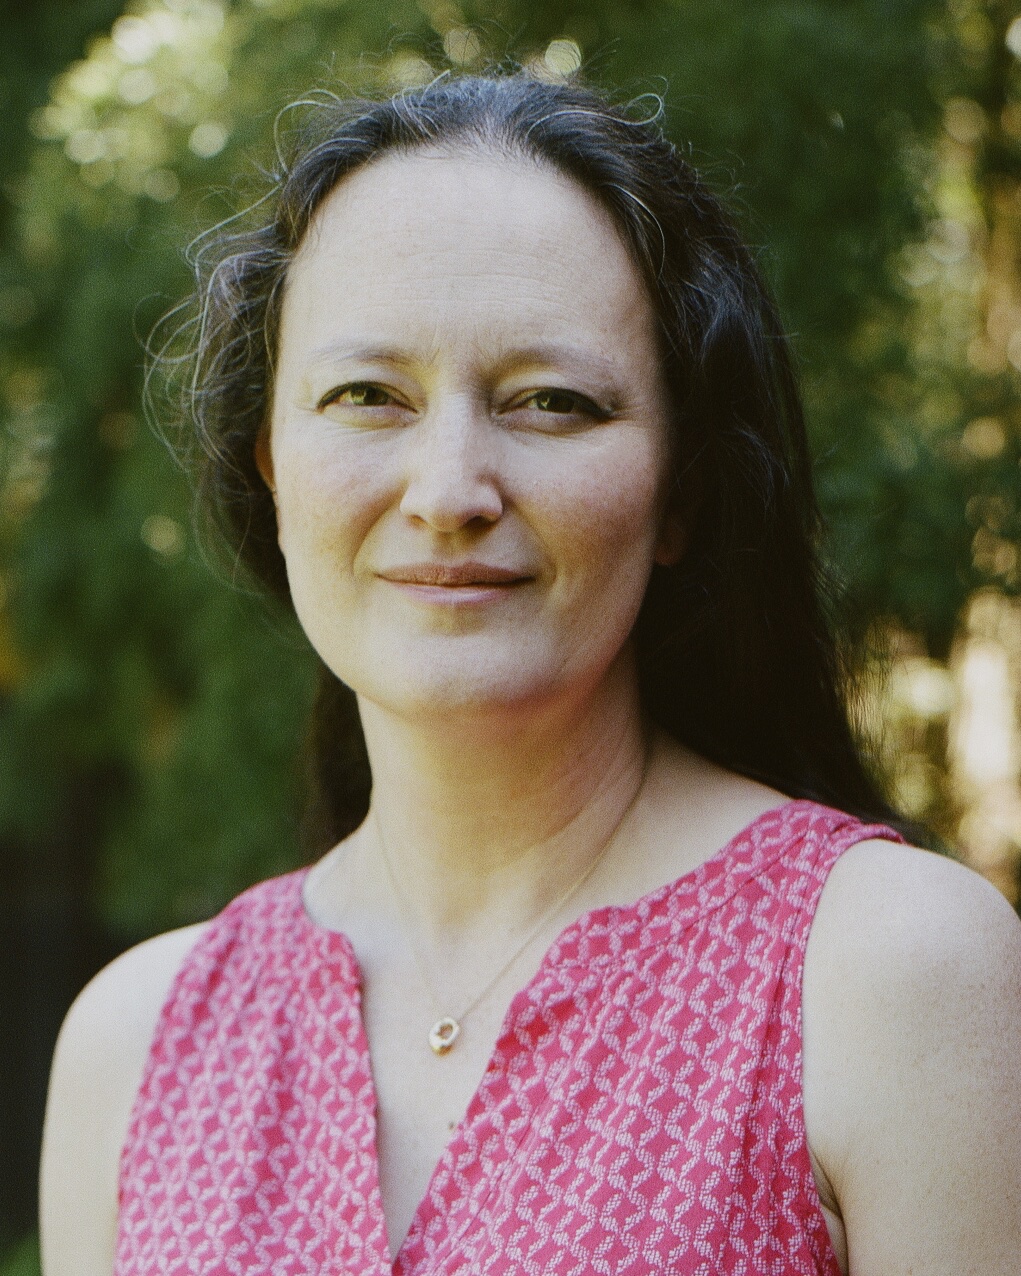 Portrait photo of a smiling dark haired woman outdoors with trees in the background.